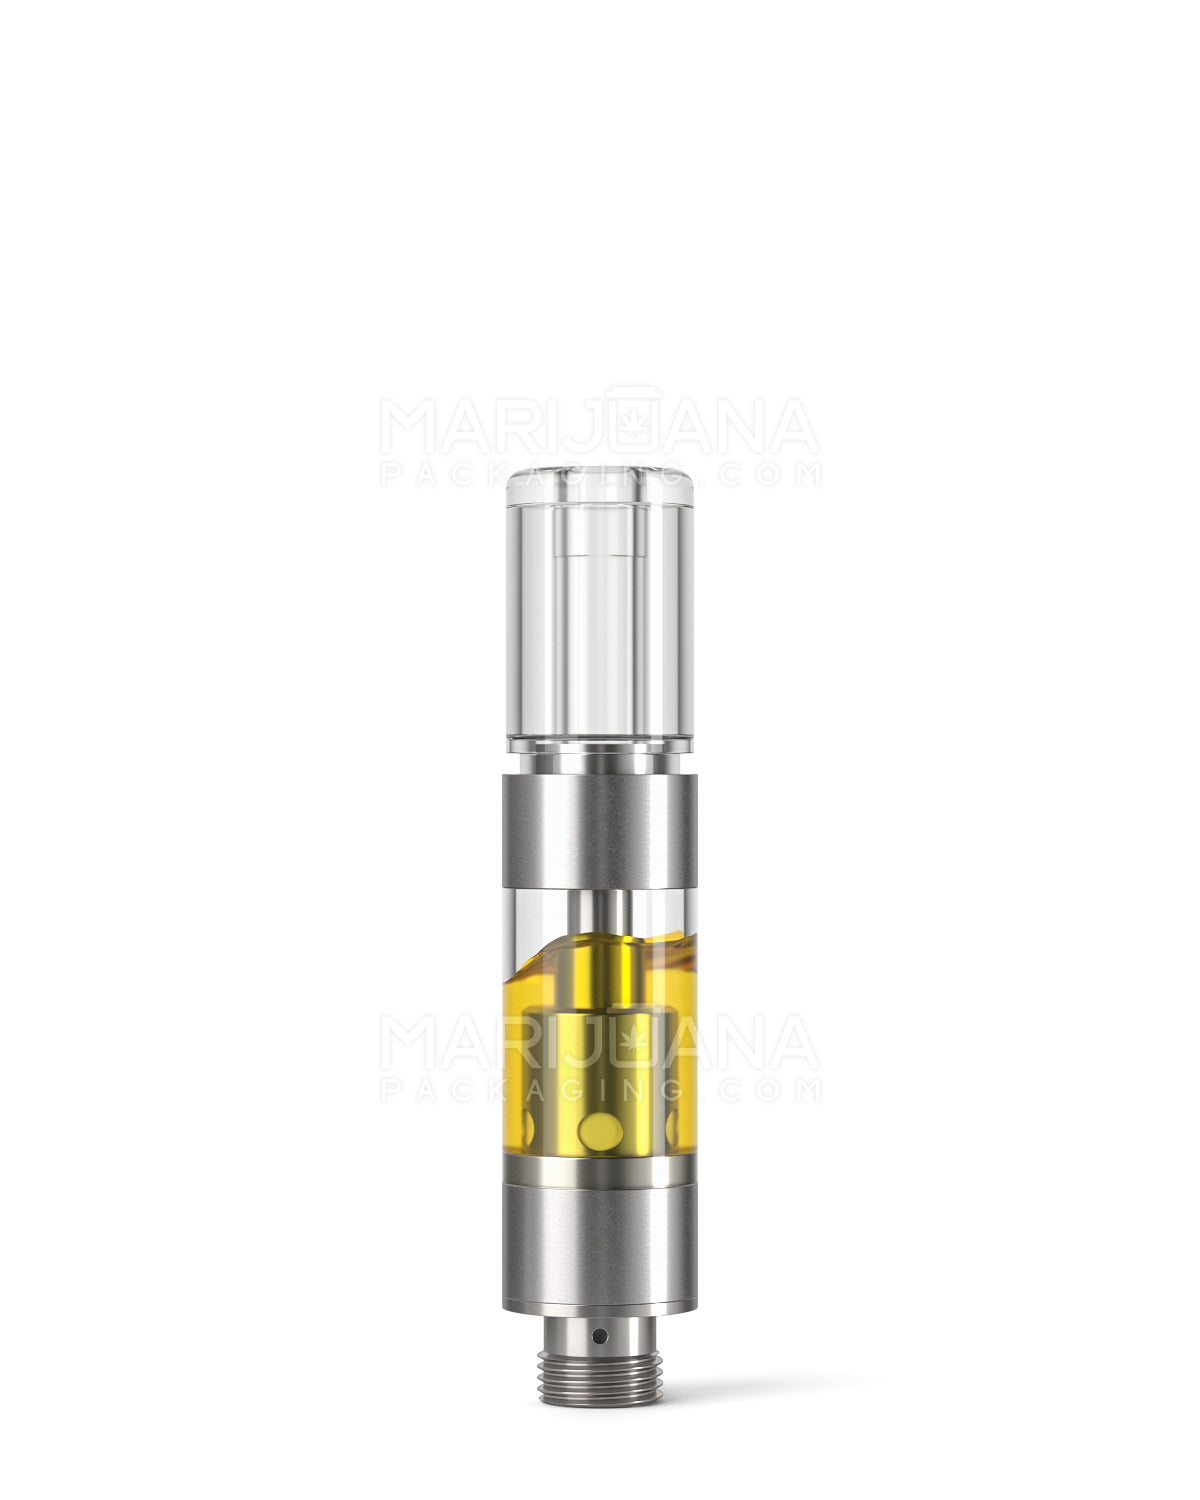 CCELL | Liquid6 Reactor Plastic Vape Cartridge with Barrel Clear Plastic Mouthpiece | 0.5mL - Press On - 100 Count - 2